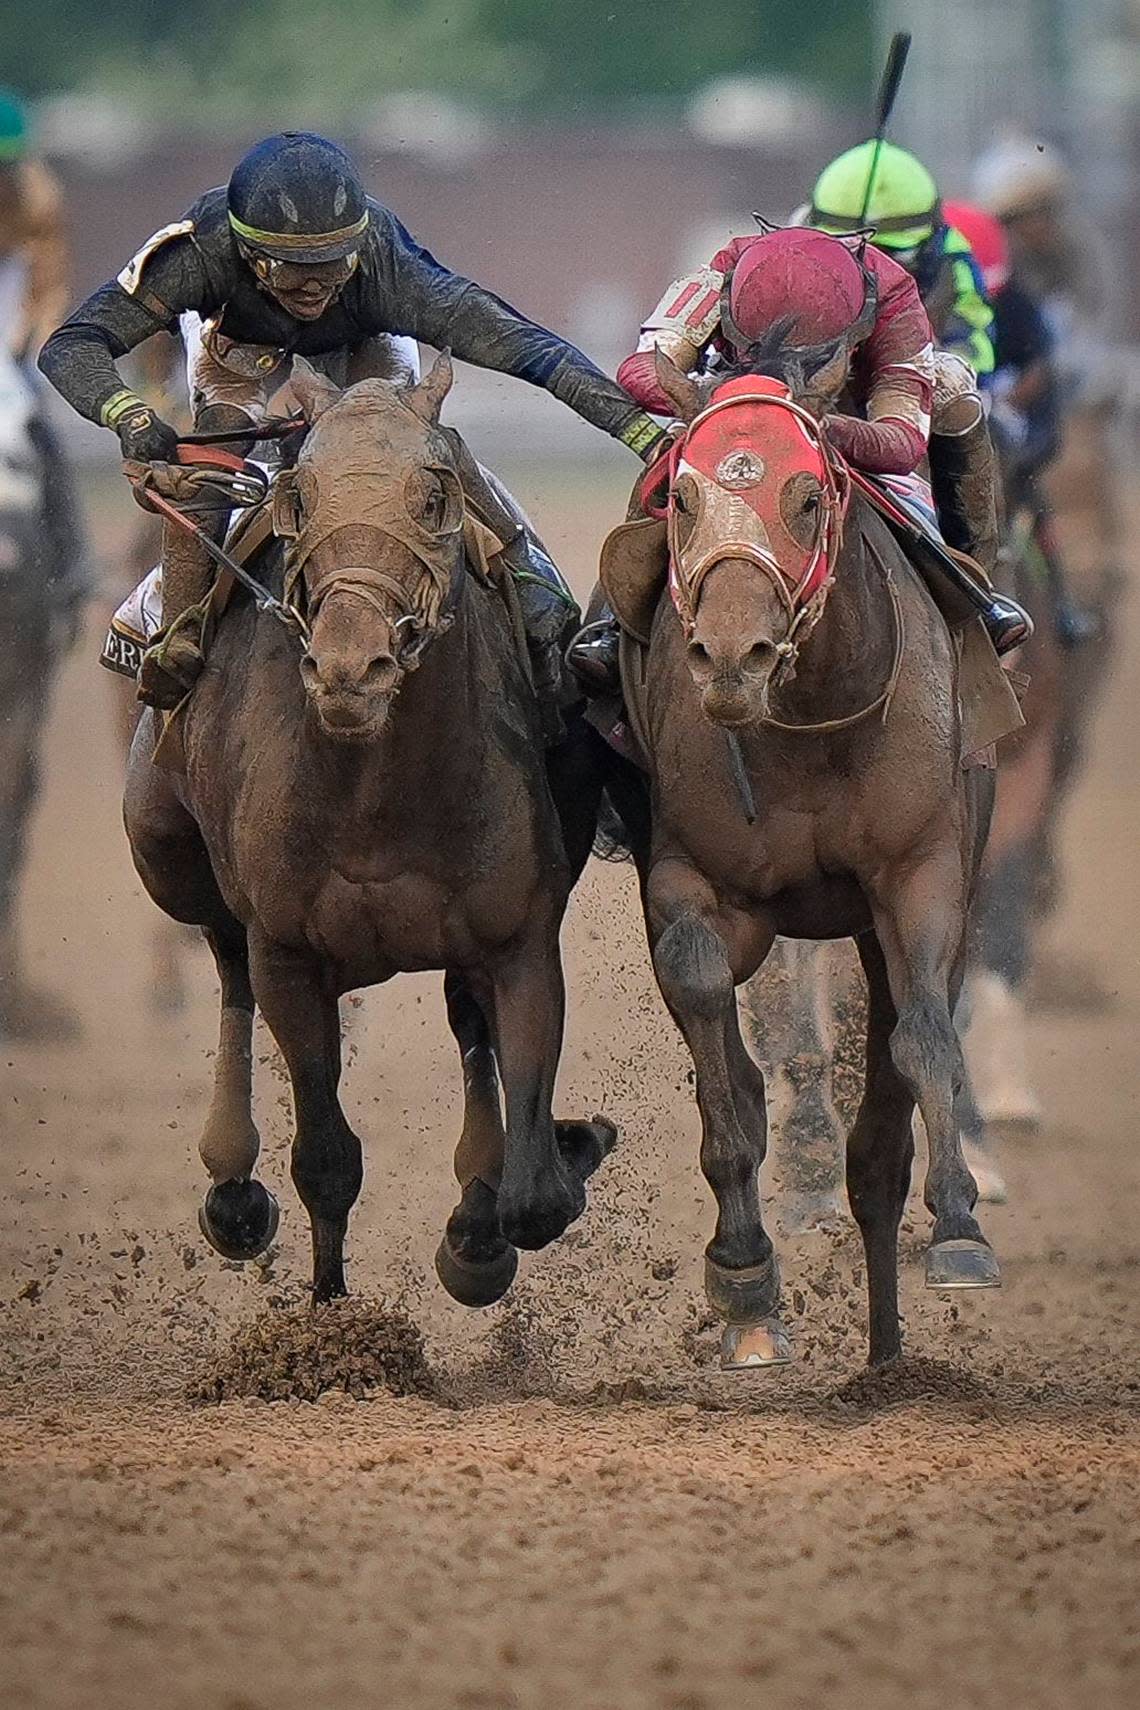 Sierra Leone with Tyler Gafflione, left, and Forever Young with Ryusei Sakai battle as they approach the finish line during Saturday’s Kentucky Derby. The Kentucky Horse Racing Commission has asked Gaffalione to attend a film review of the race later this week, after which he could face a penalty.